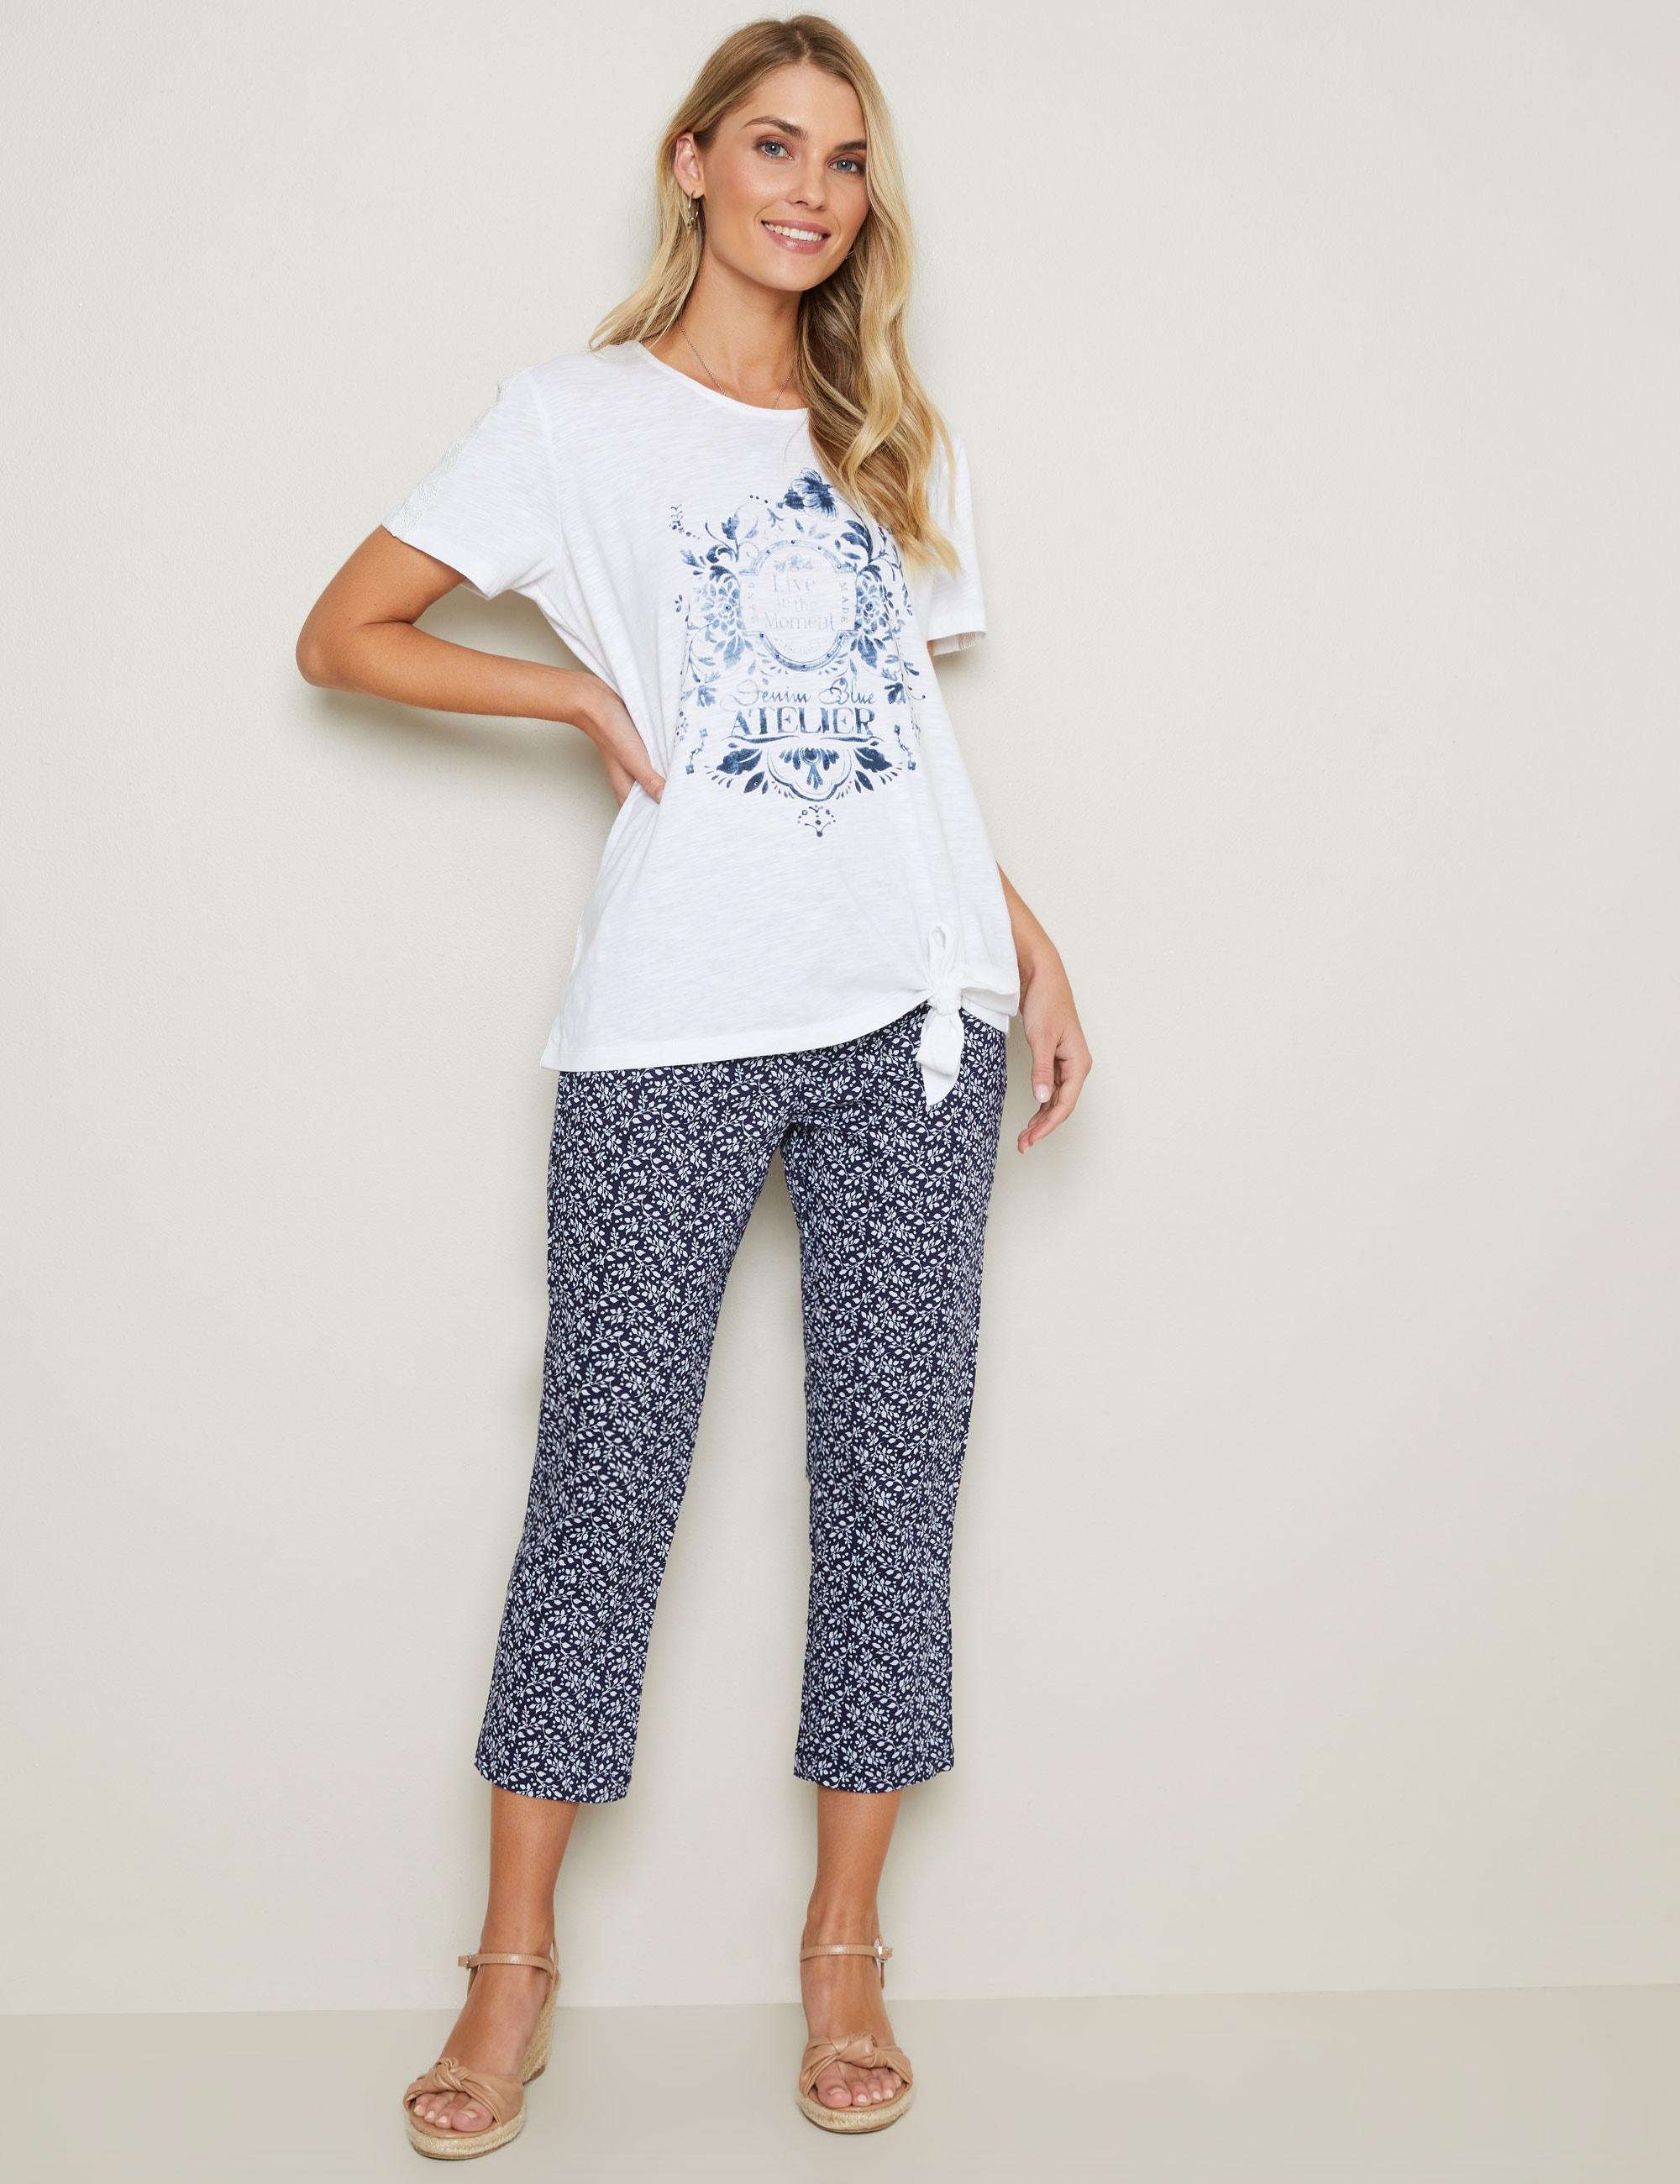 W LANE - Womens Pants - Blue Summer Cropped Cotton Work Wear - Fashion Trousers - Floral - High Waist - Elastane Trim - Smart Casual - Office Clothes